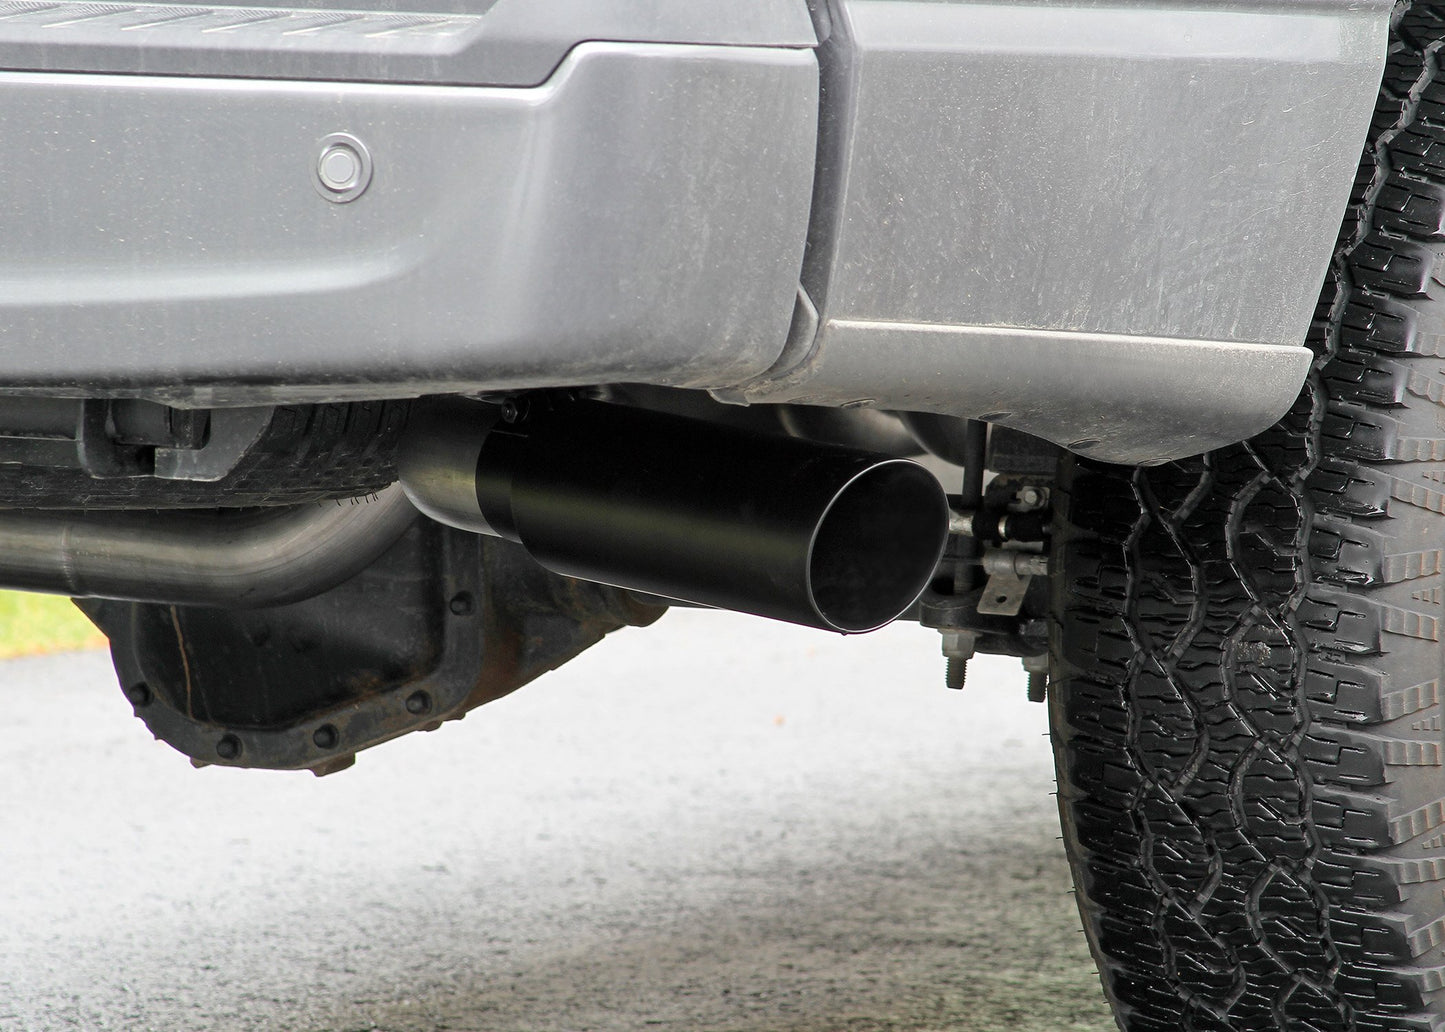 Flowmaster 3" Outlaw Dual Exit Stainless Steel Catback Exhaust System Ford F-150 2021